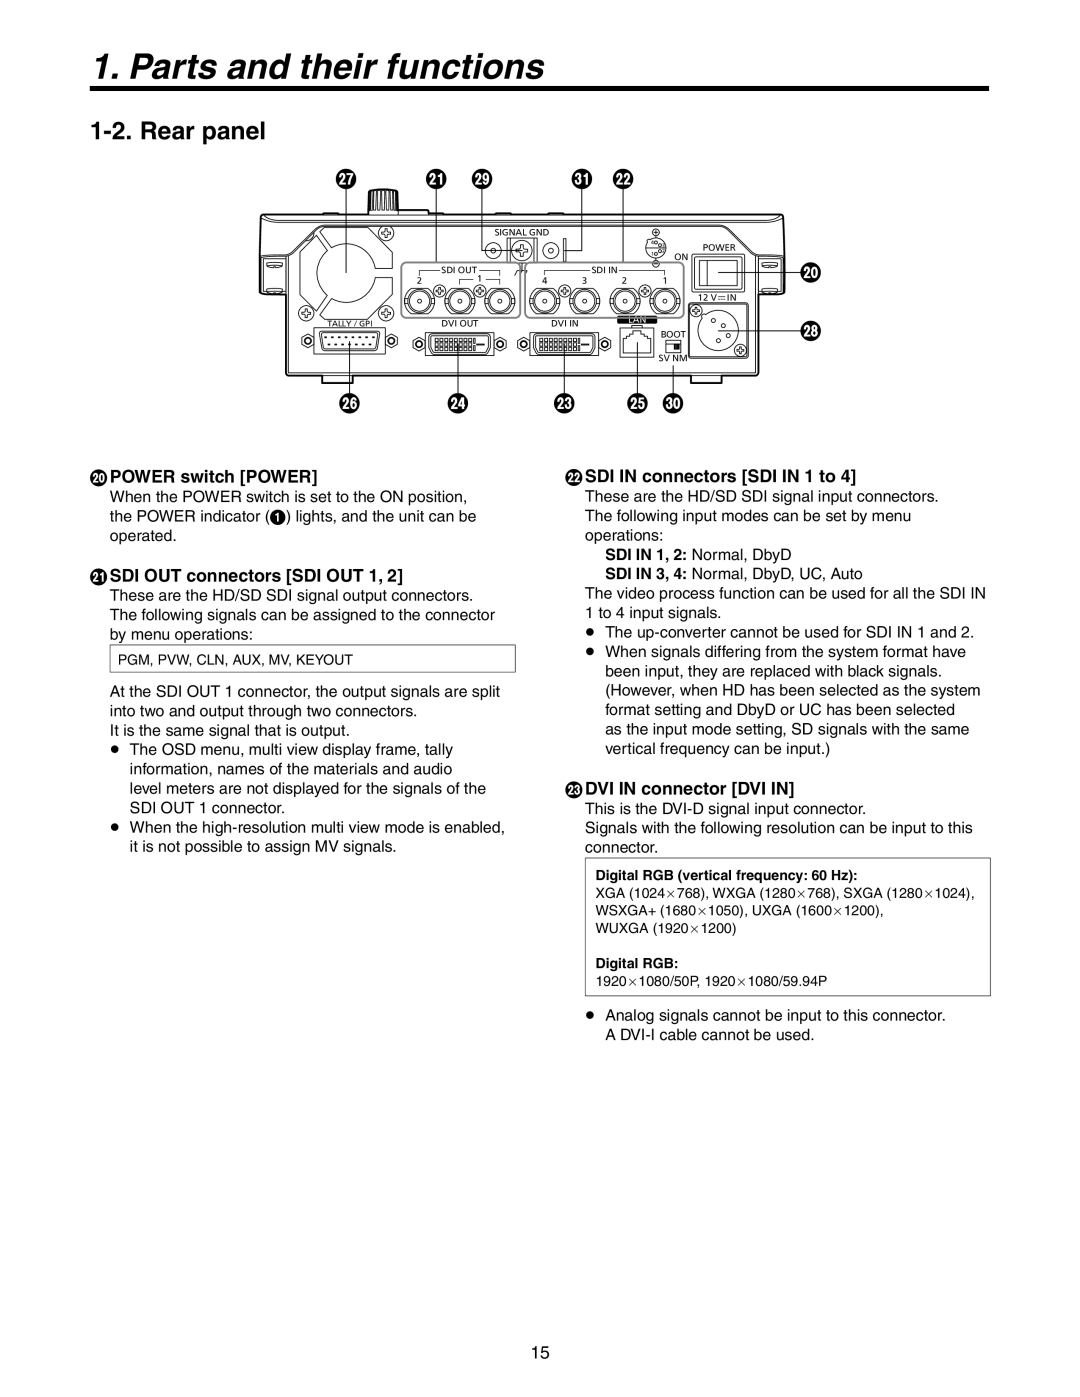 Panasonic AW-HS50N Rear panel, POWER switch POWER, SDI OUT connectors SDI OUT 1, SDI IN connectors SDI IN 1 to 